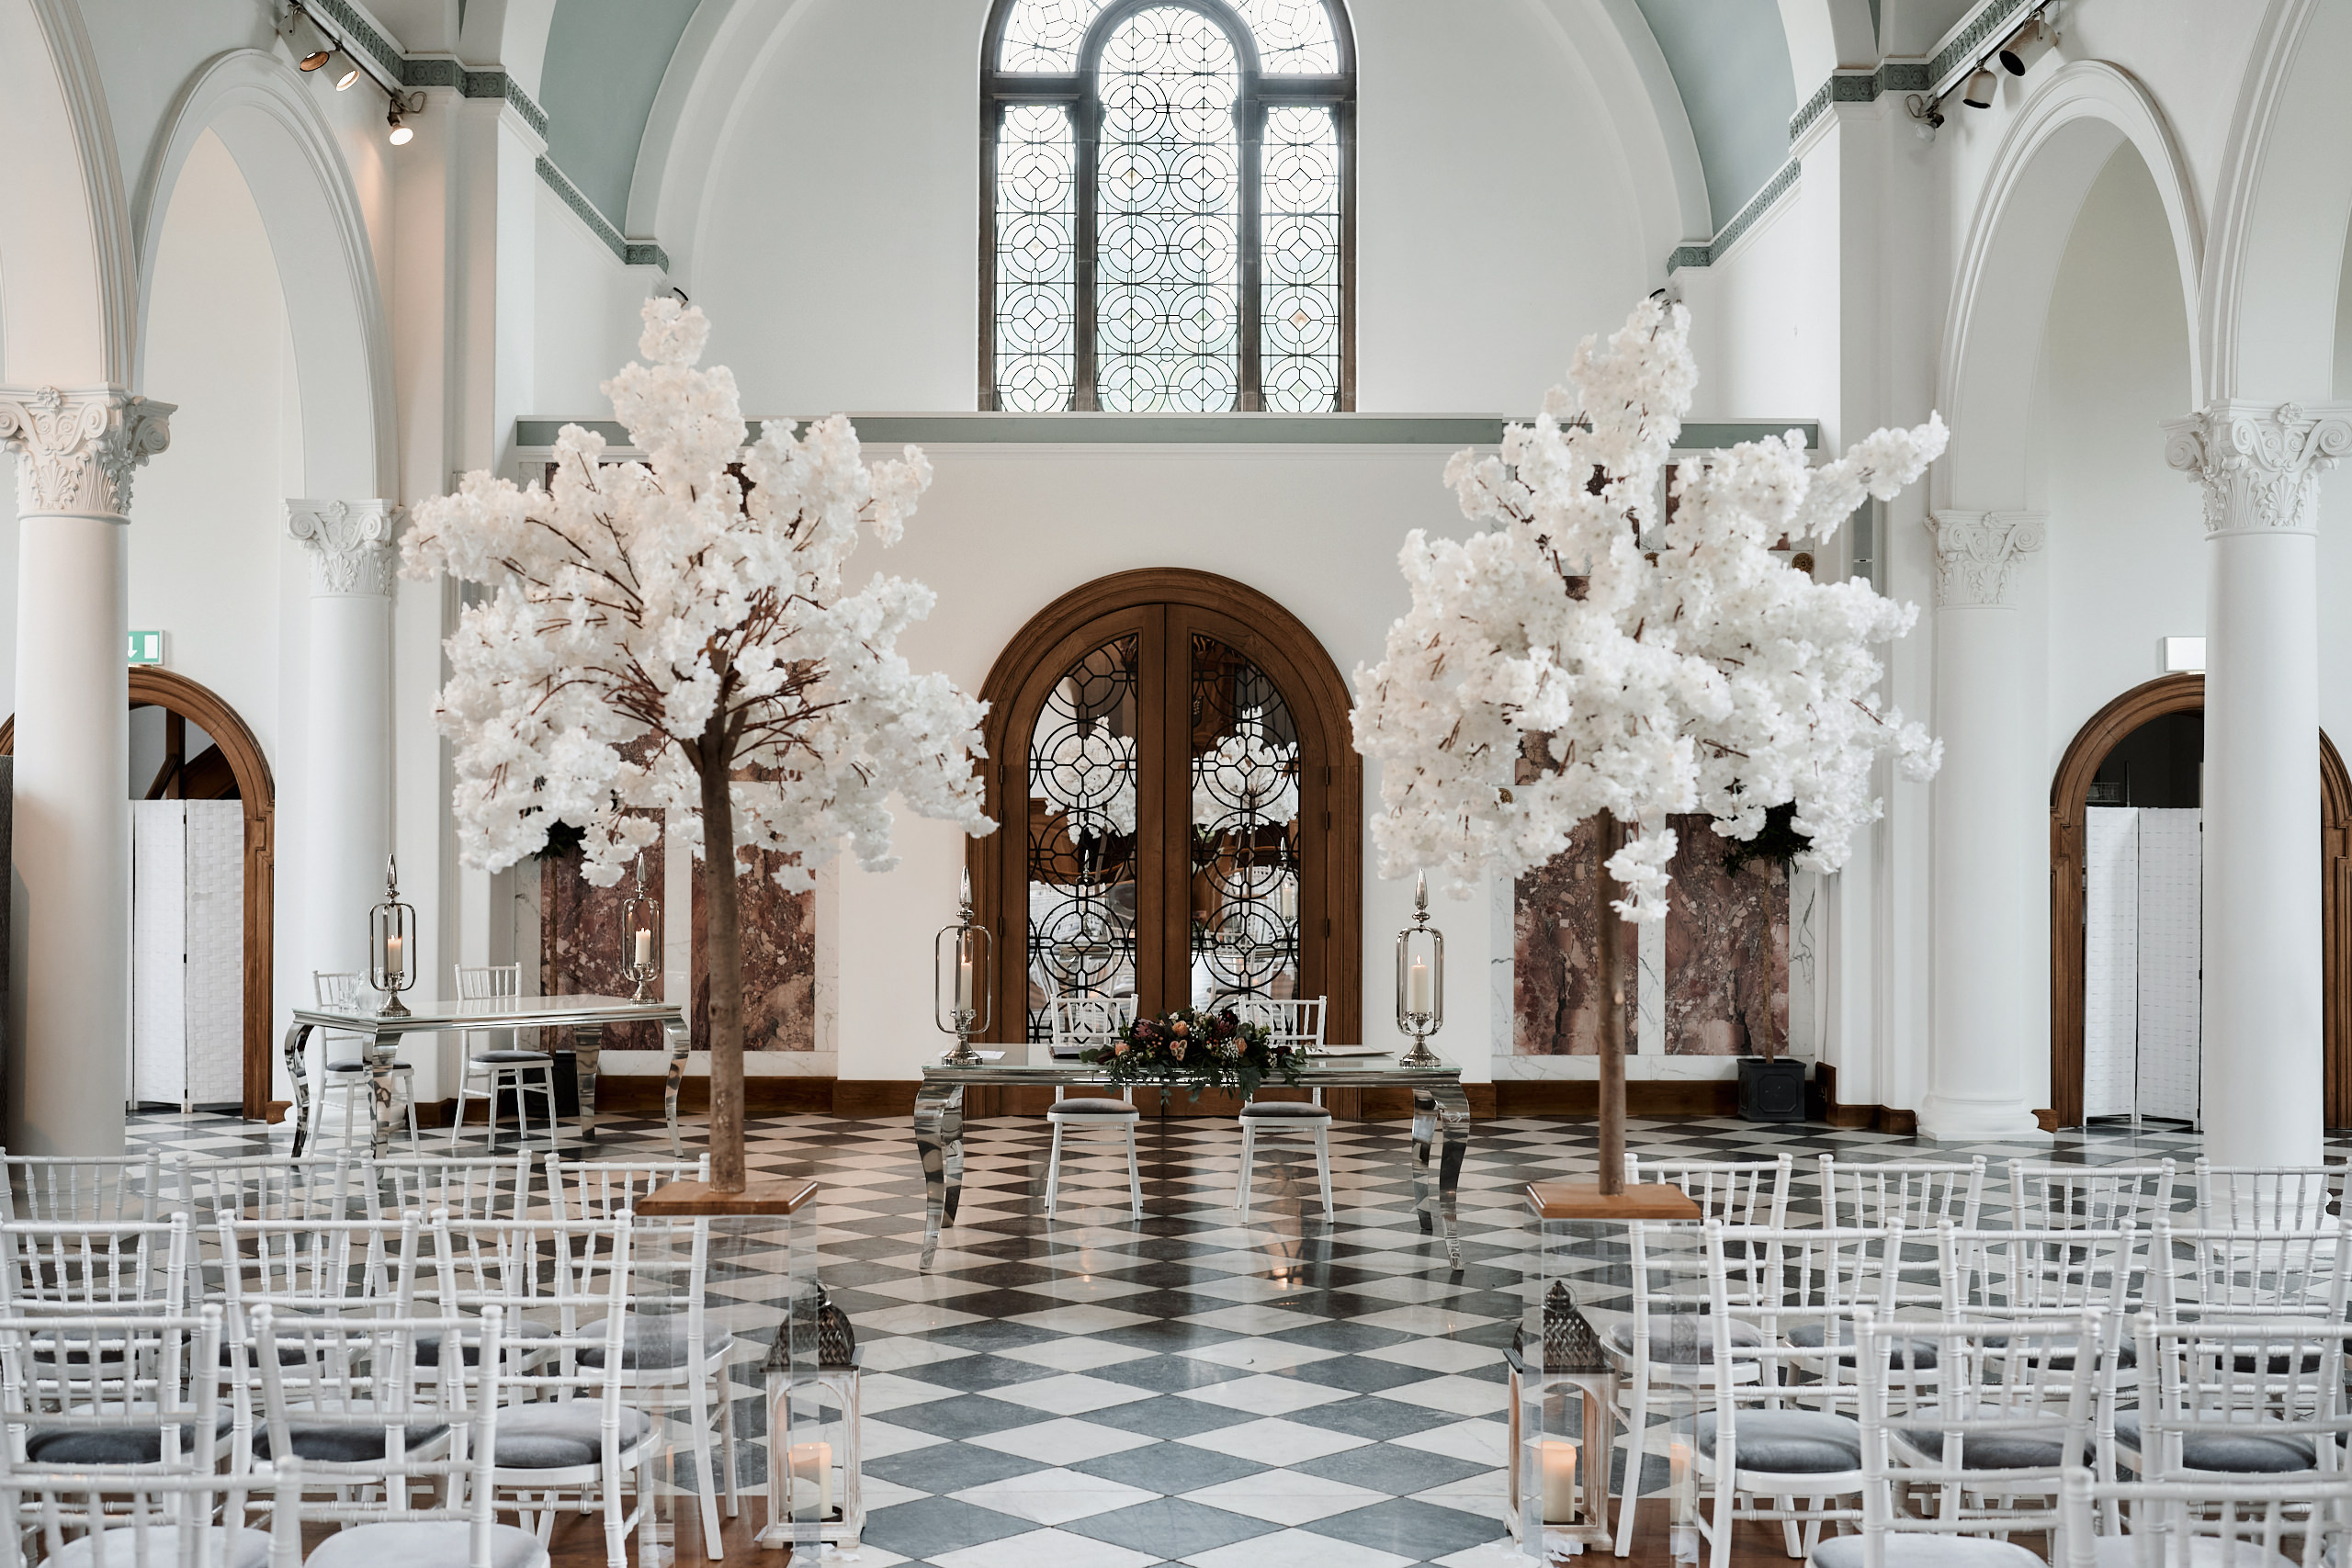 A wedding is happening in a church with white chairs and trees.